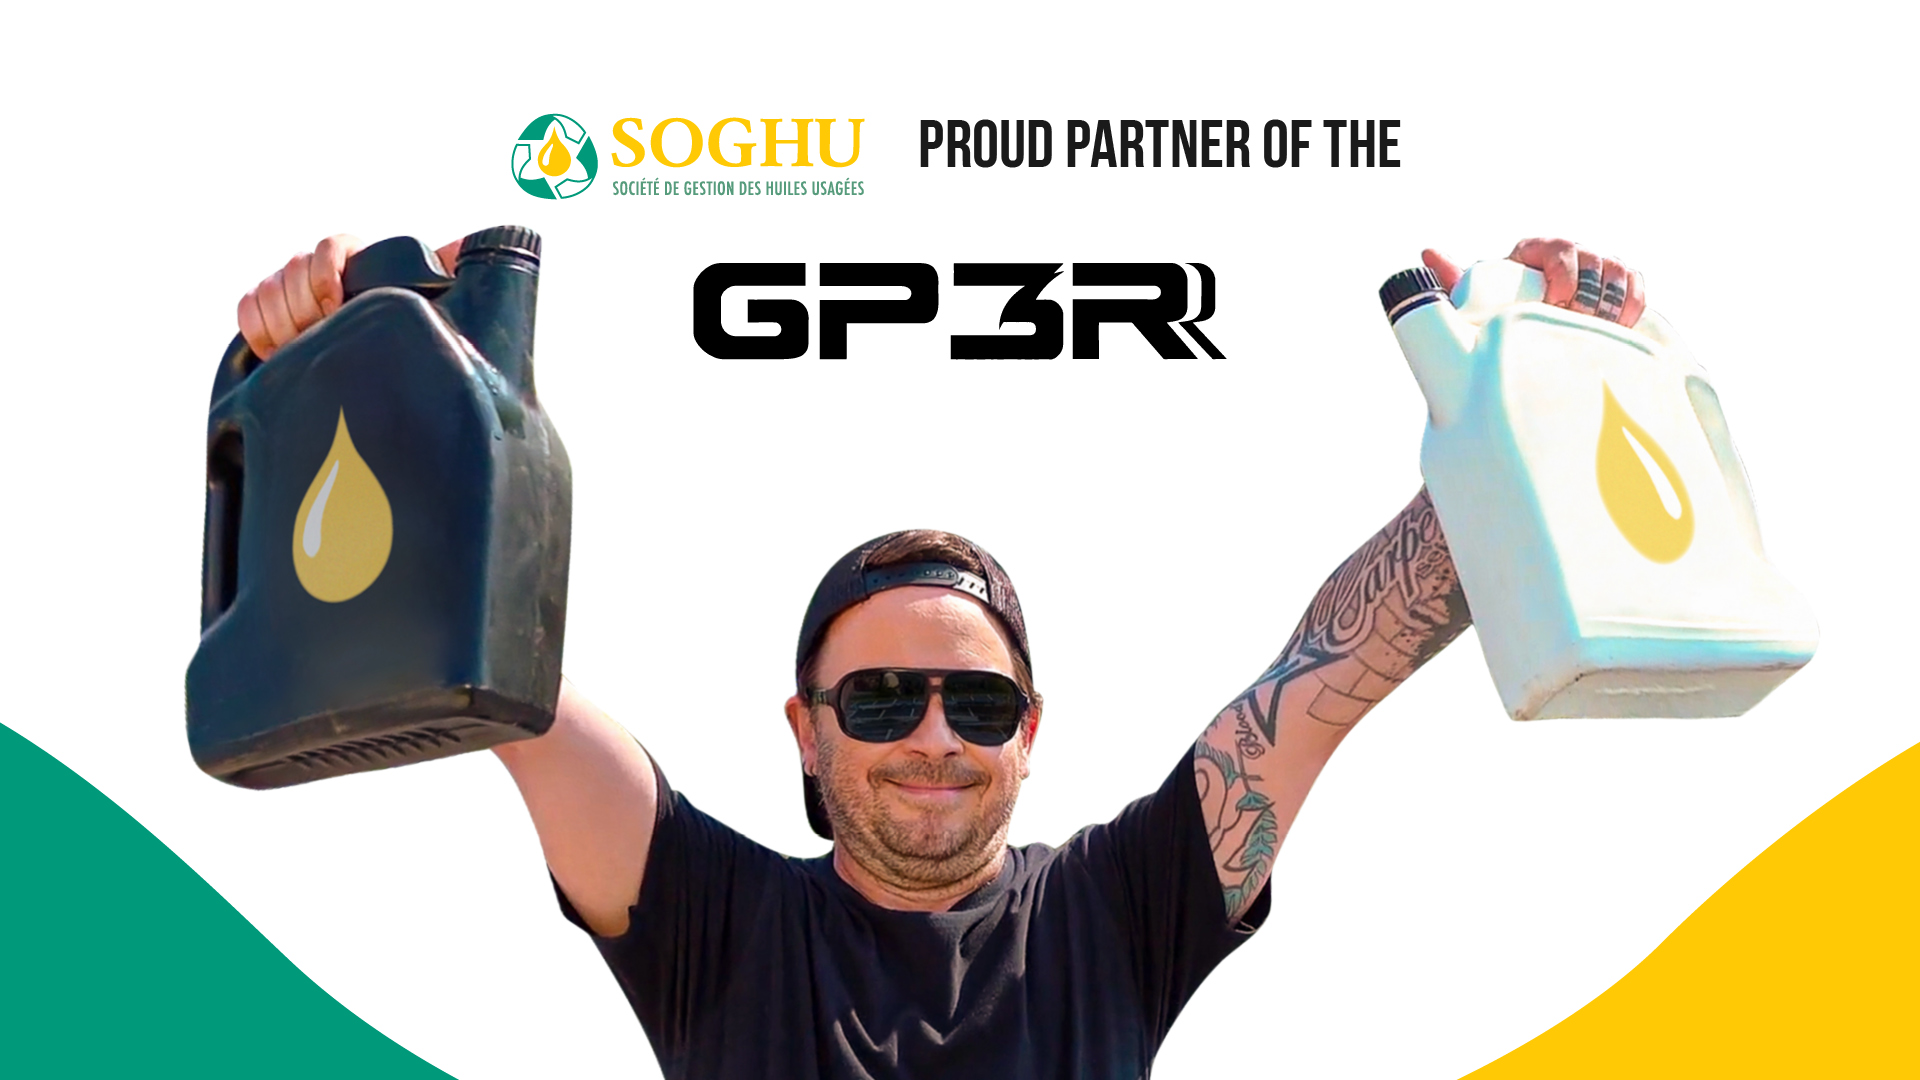 Soghu and it's spokesperson Baby, prout partners of the GP3R